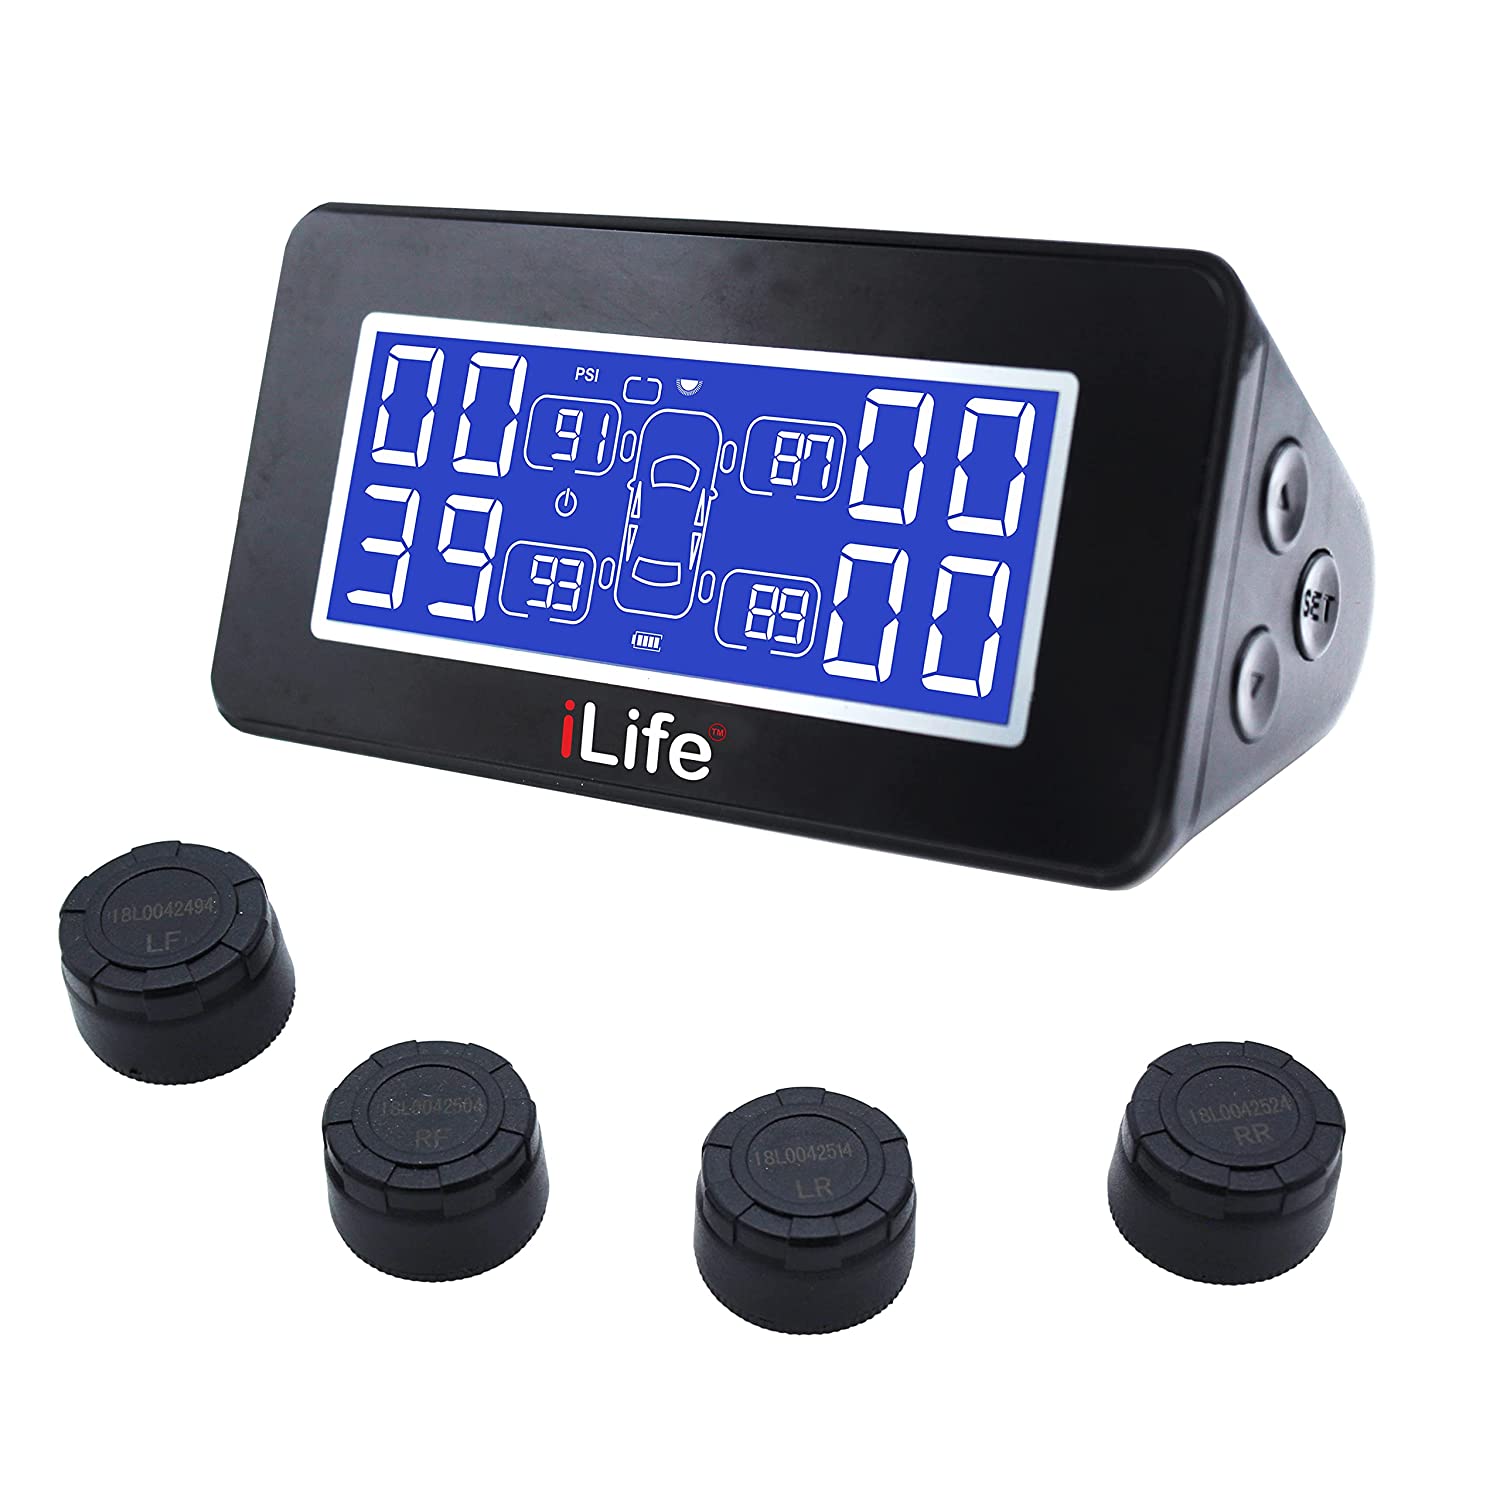 iLife Universal Solar TPMS, Wireless Tire Pressure Monitoring System with 4 DIY External Cap Sensors(0-6Bar/0-87Psi), Real-time Display 4 Tires' Pressure and Temperature